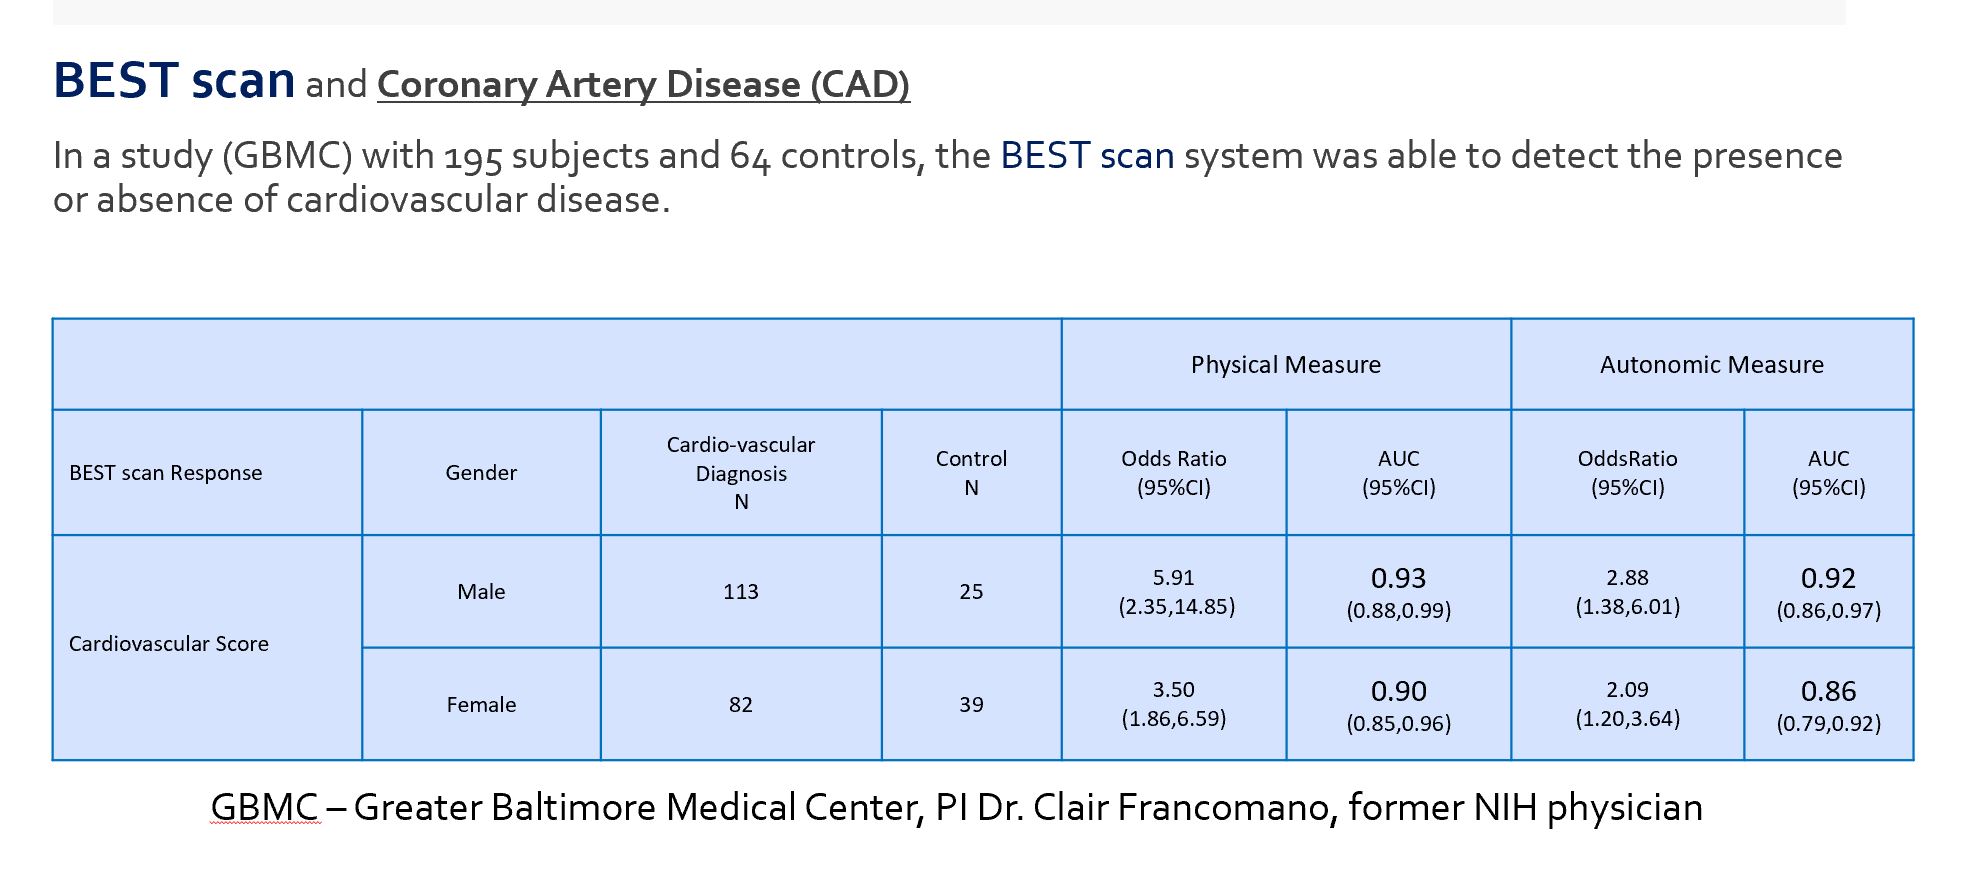 The BEST Scan and Coronary Artery Disease